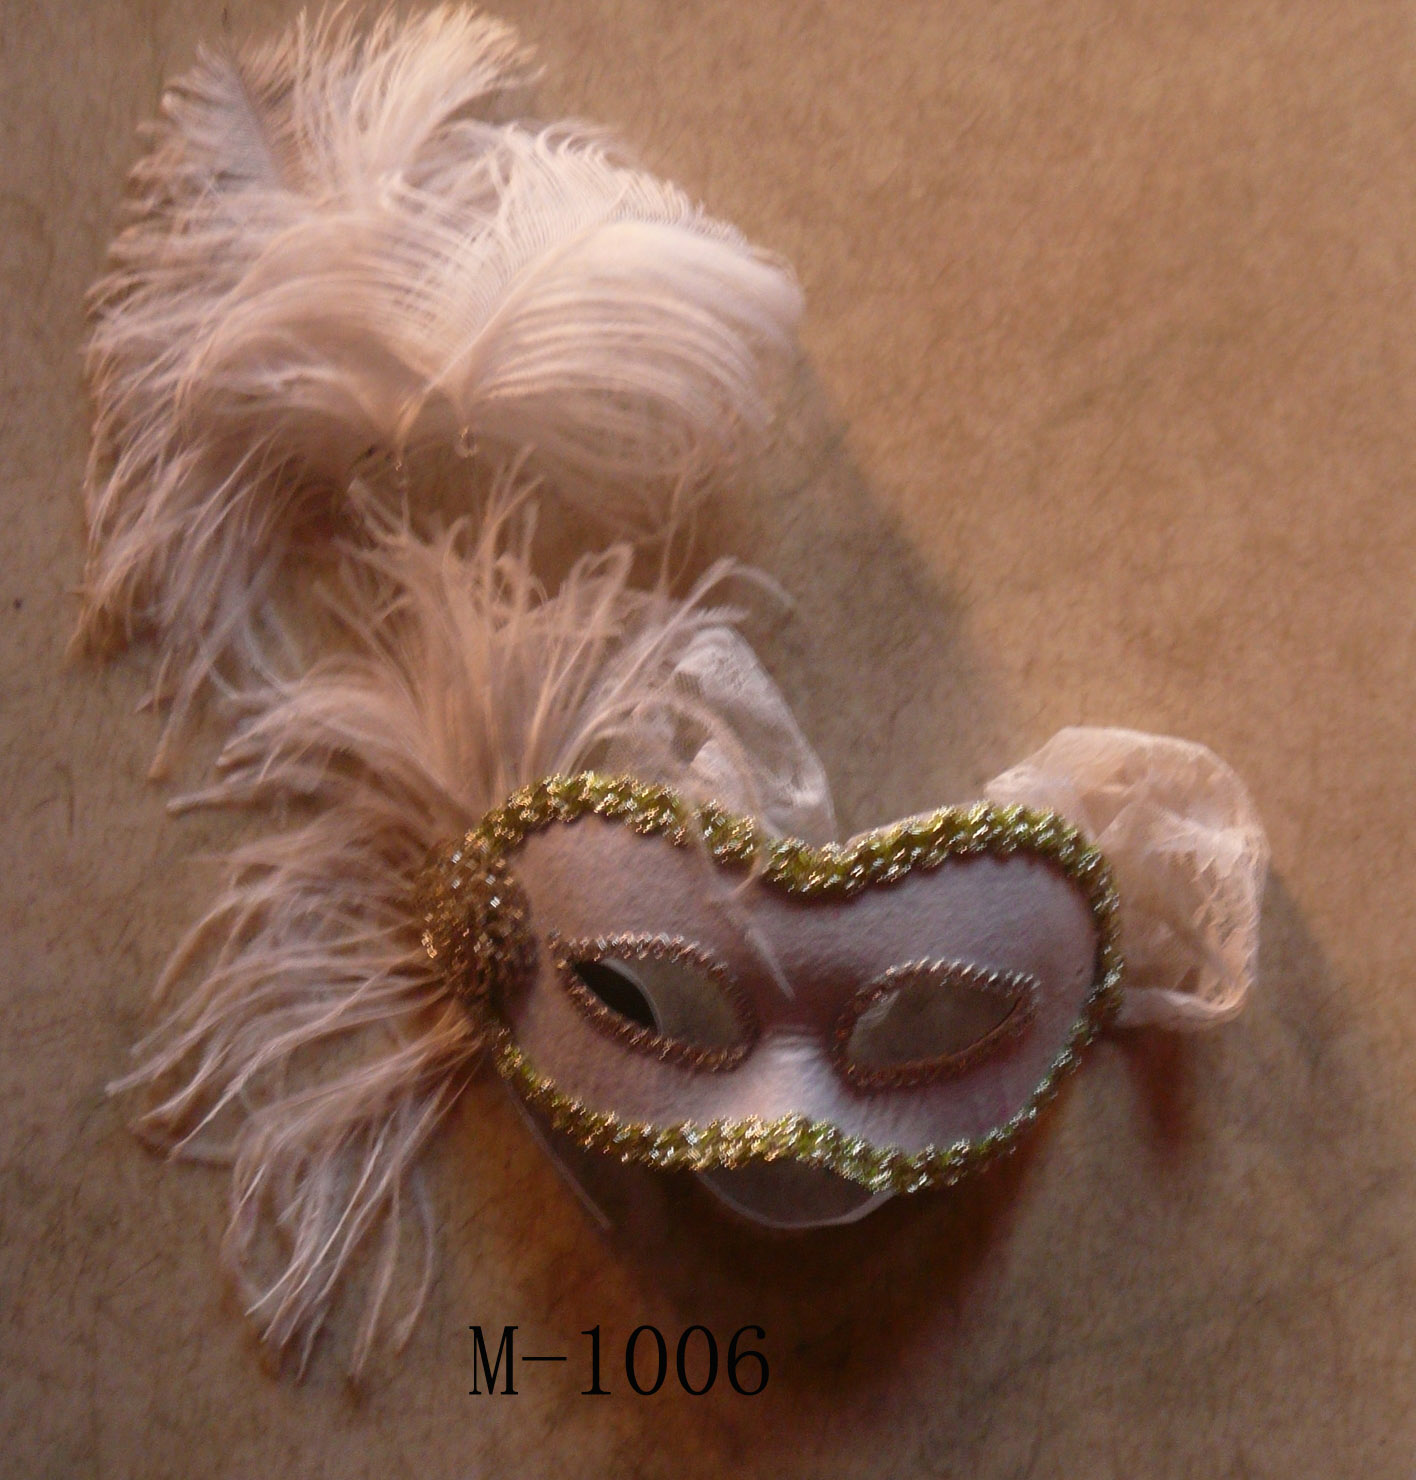 Cheap feather masks for sale - Made in China M-1006